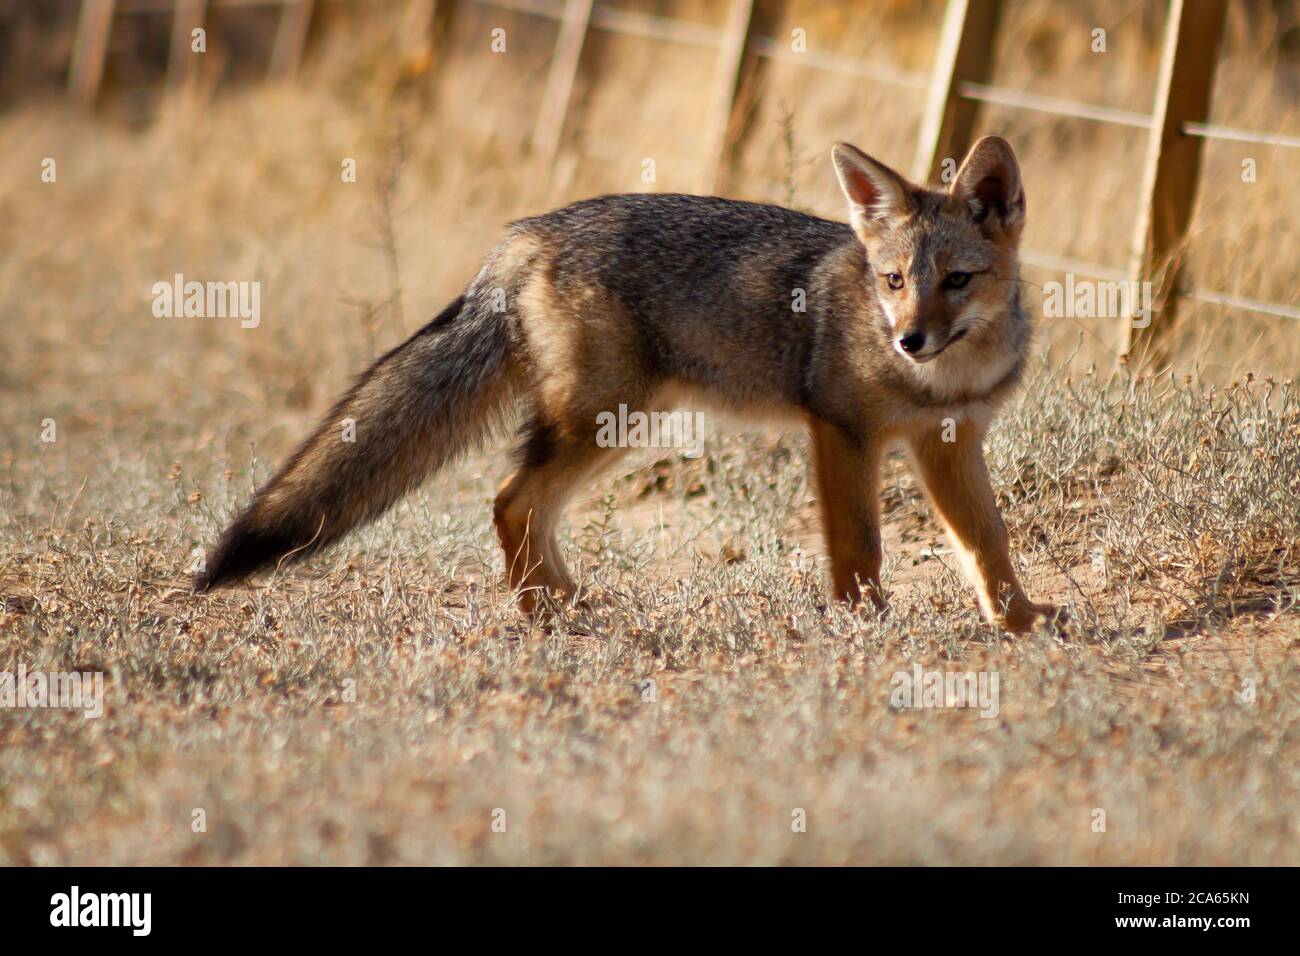 Patagonian gray fox walking on the steppe near a field fence. Stock Photo